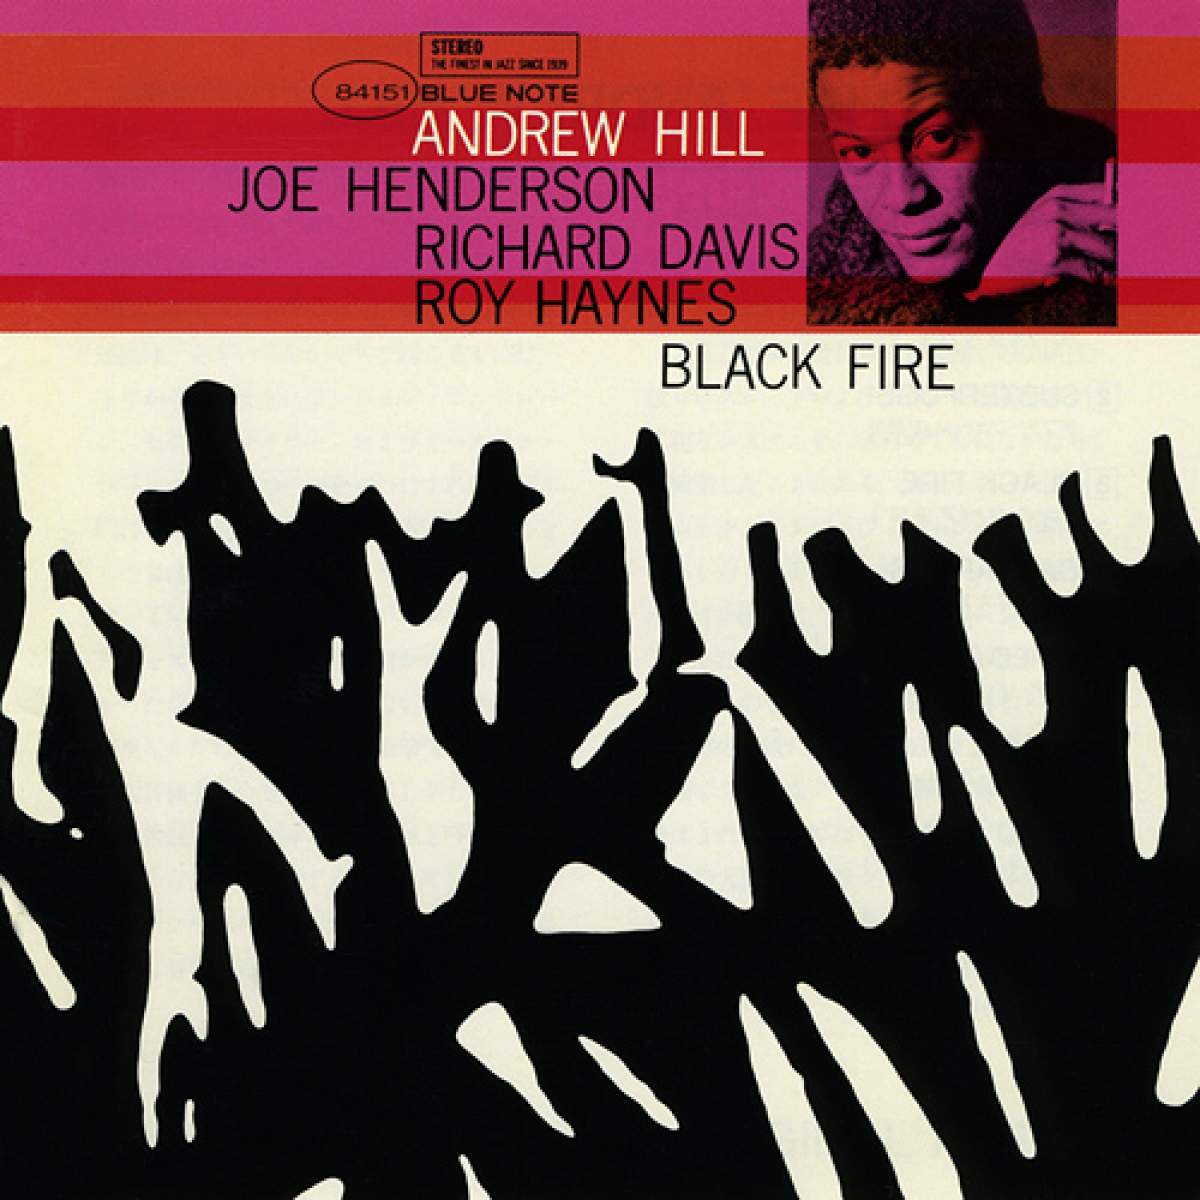 The LP cover for Andrew Hill's Blue Note album BLACK FIRE.